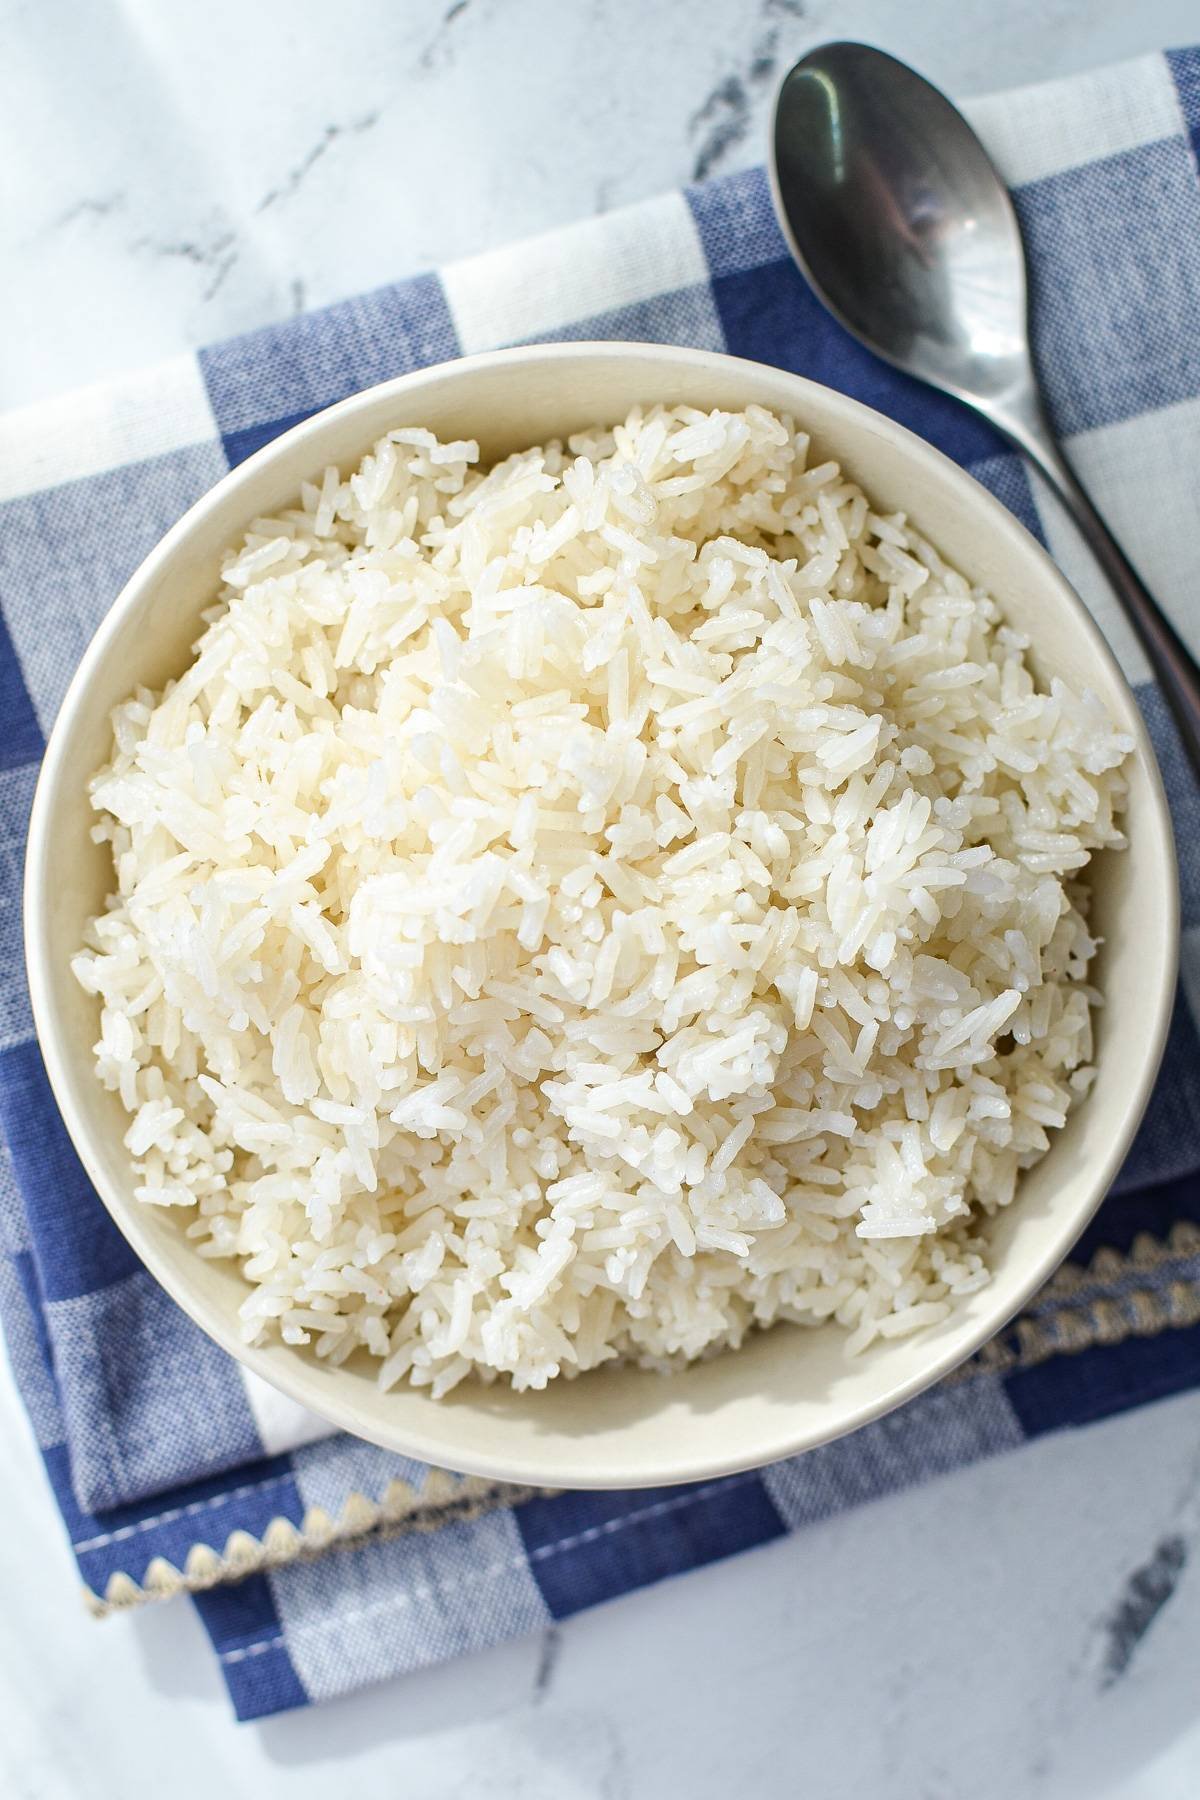 A bowl of white rice on a blue check napkin, with a spoon on the side.